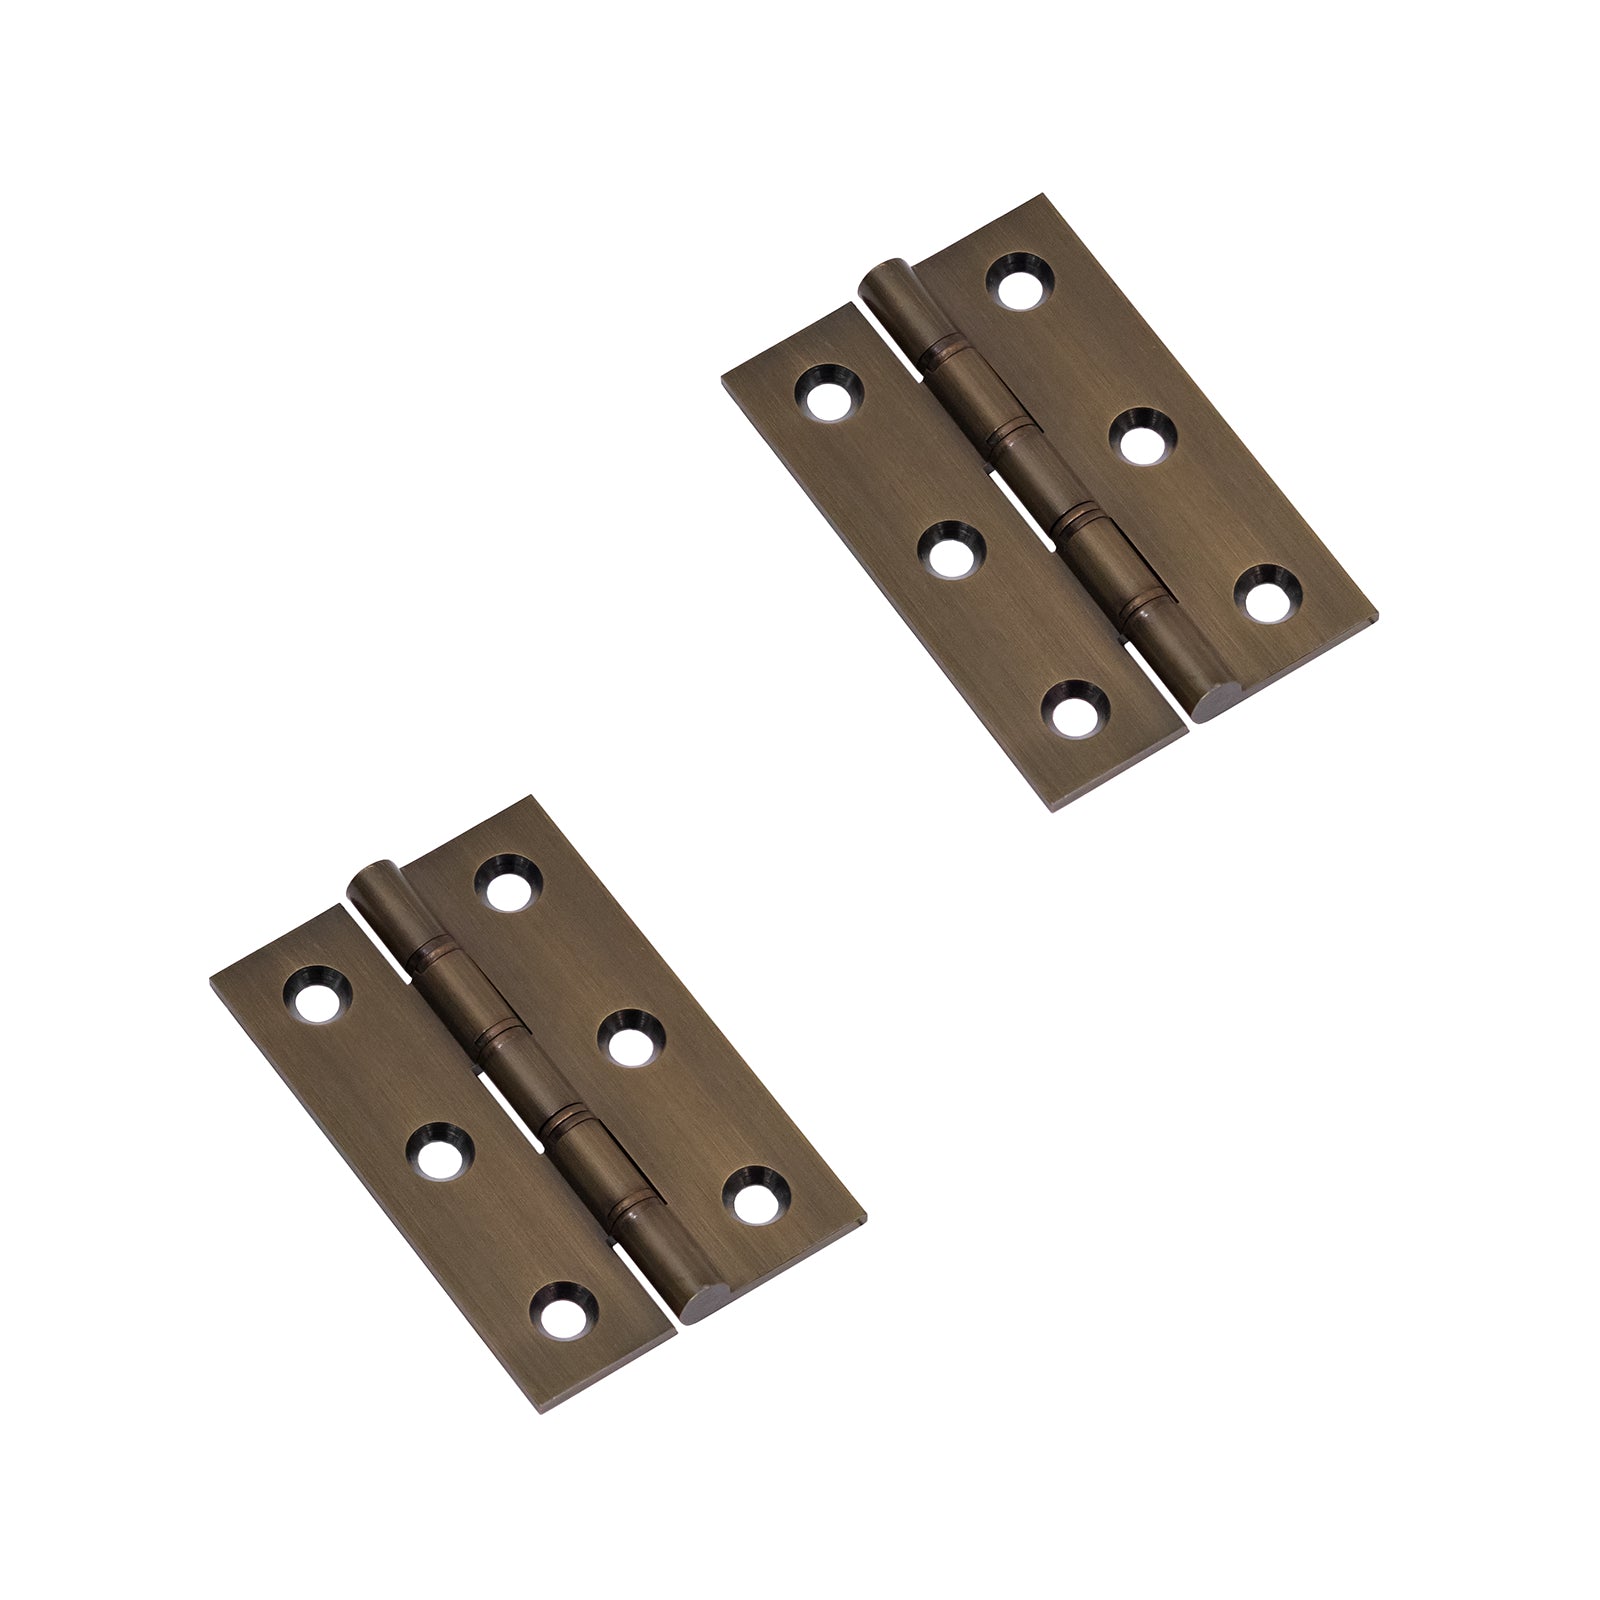 Solid Brass 3 Inch Butt Hinge in Aged Brass Finish